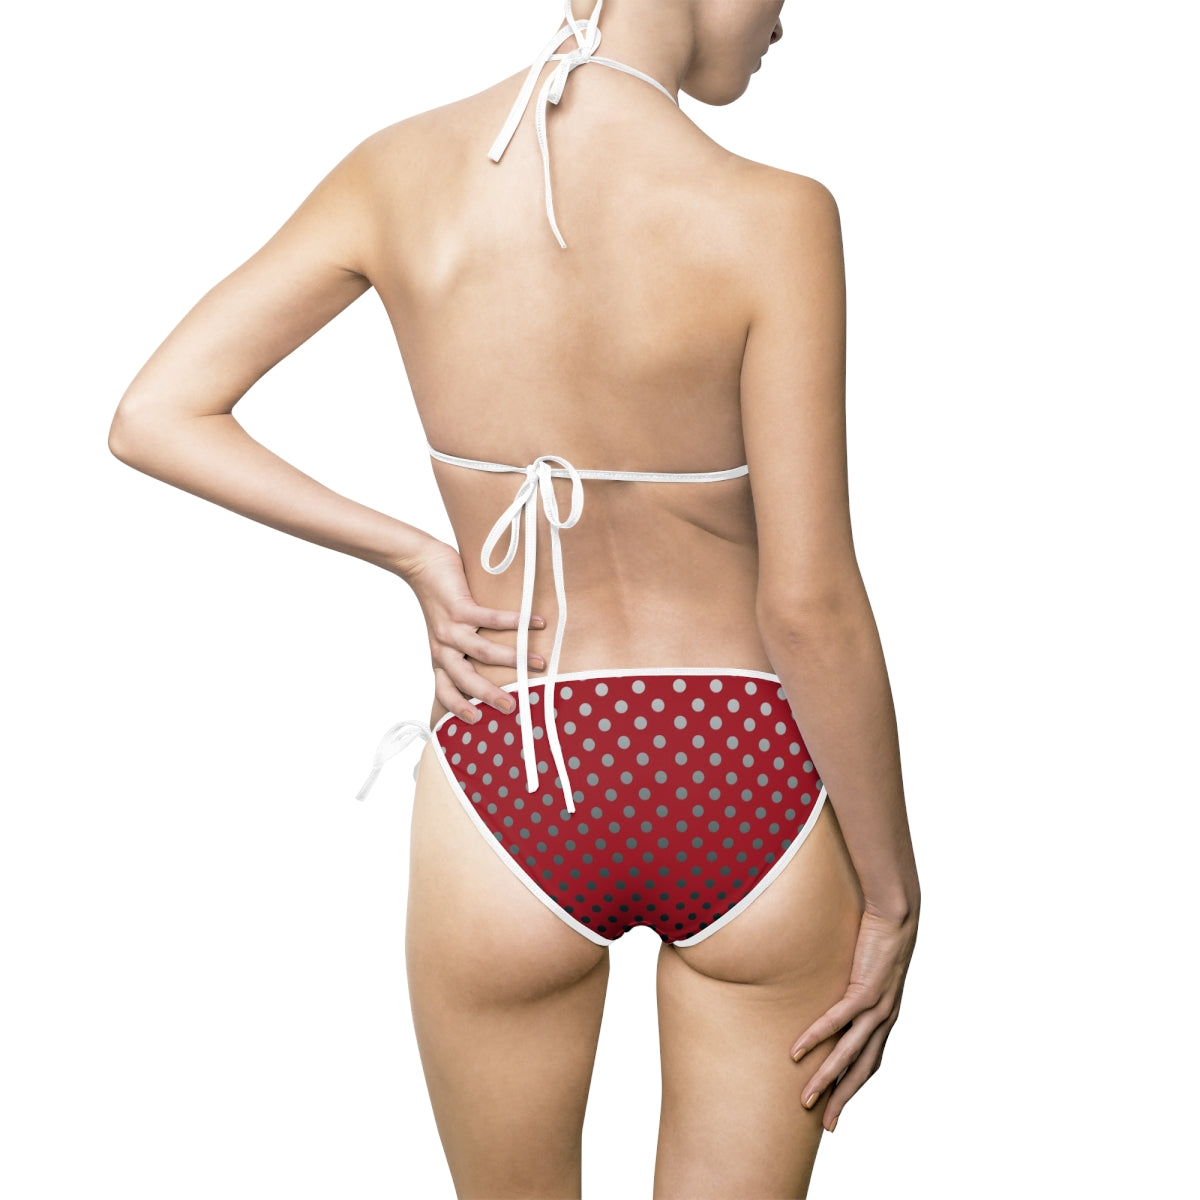 Red with Black Gray and White dots - Women's Bikini Swimsuit